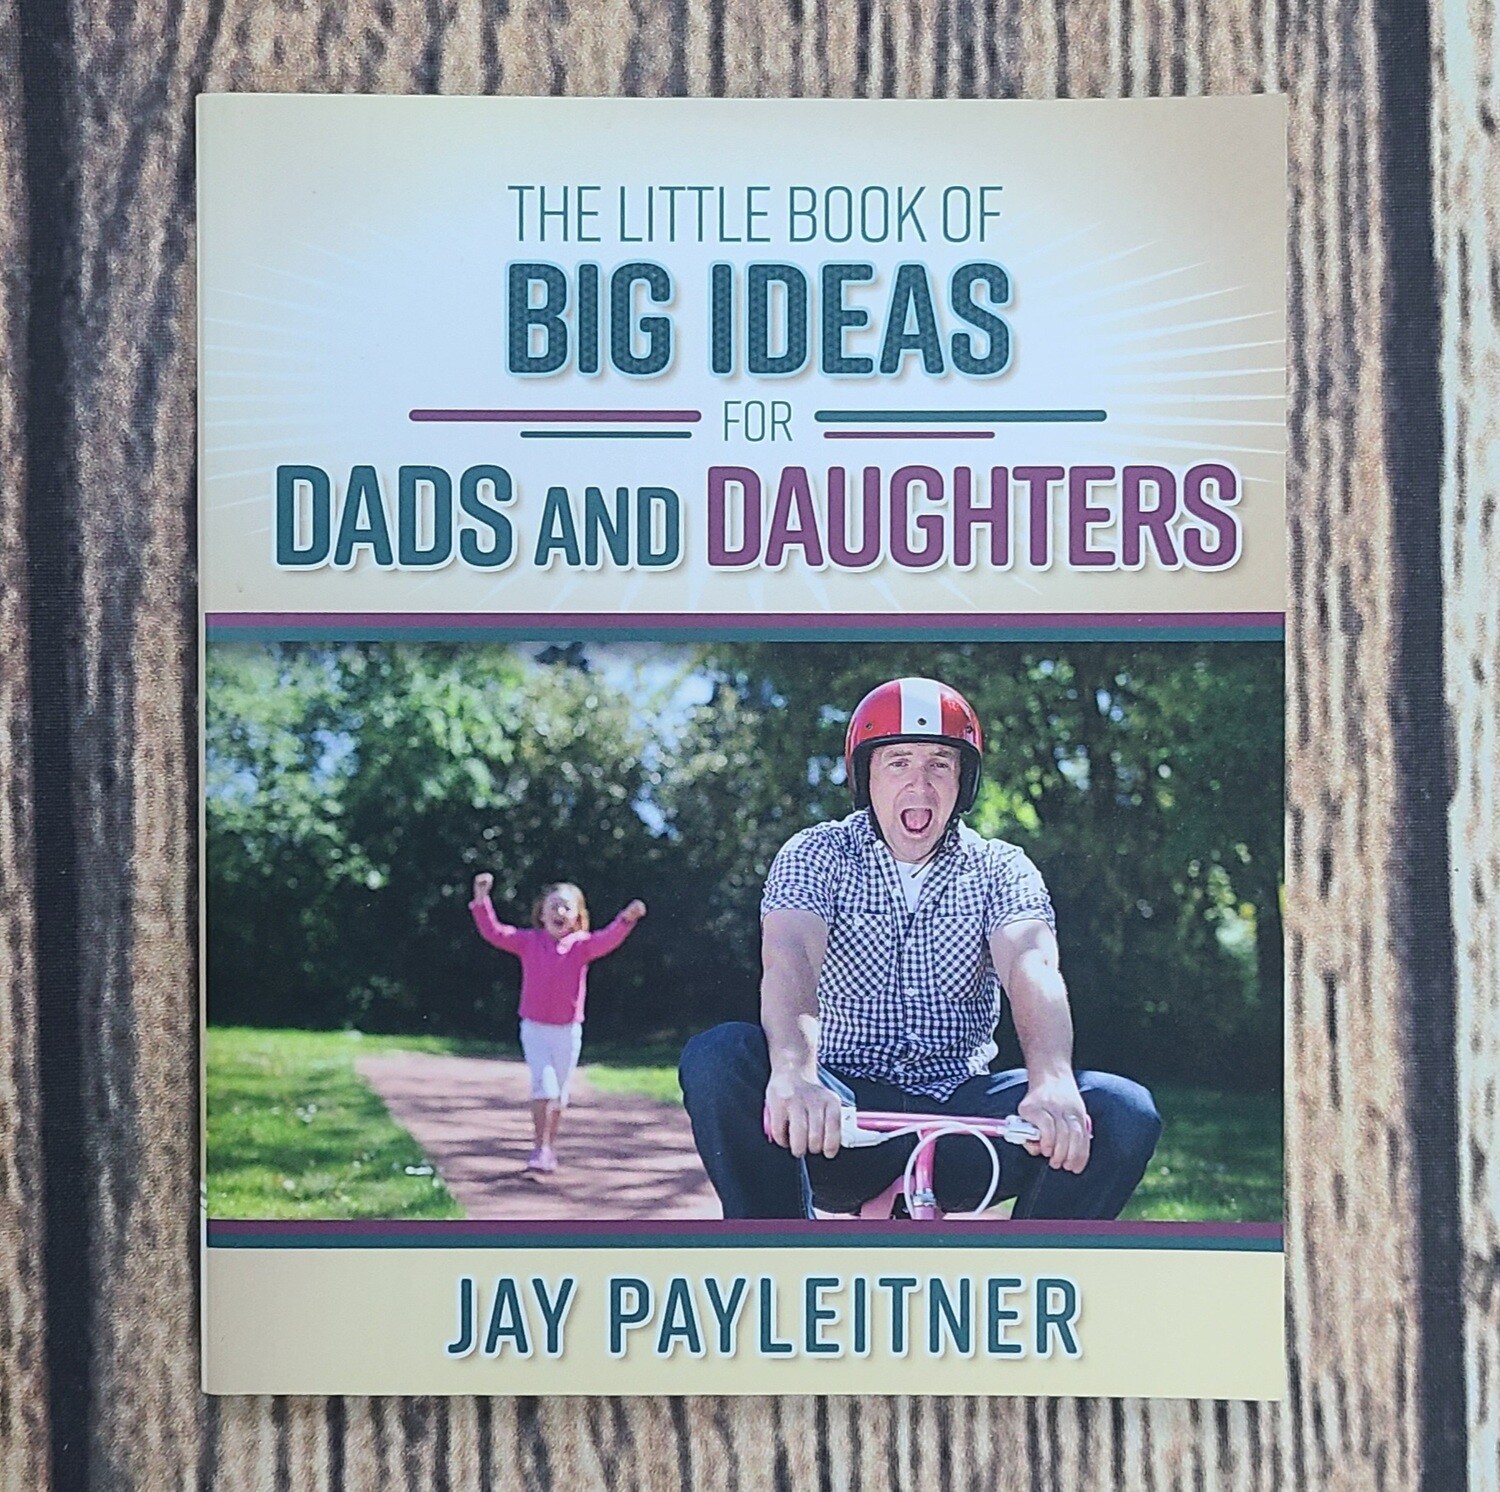 The Little Book of Big Ideas for Dads and Daughters by Jay Payleitner